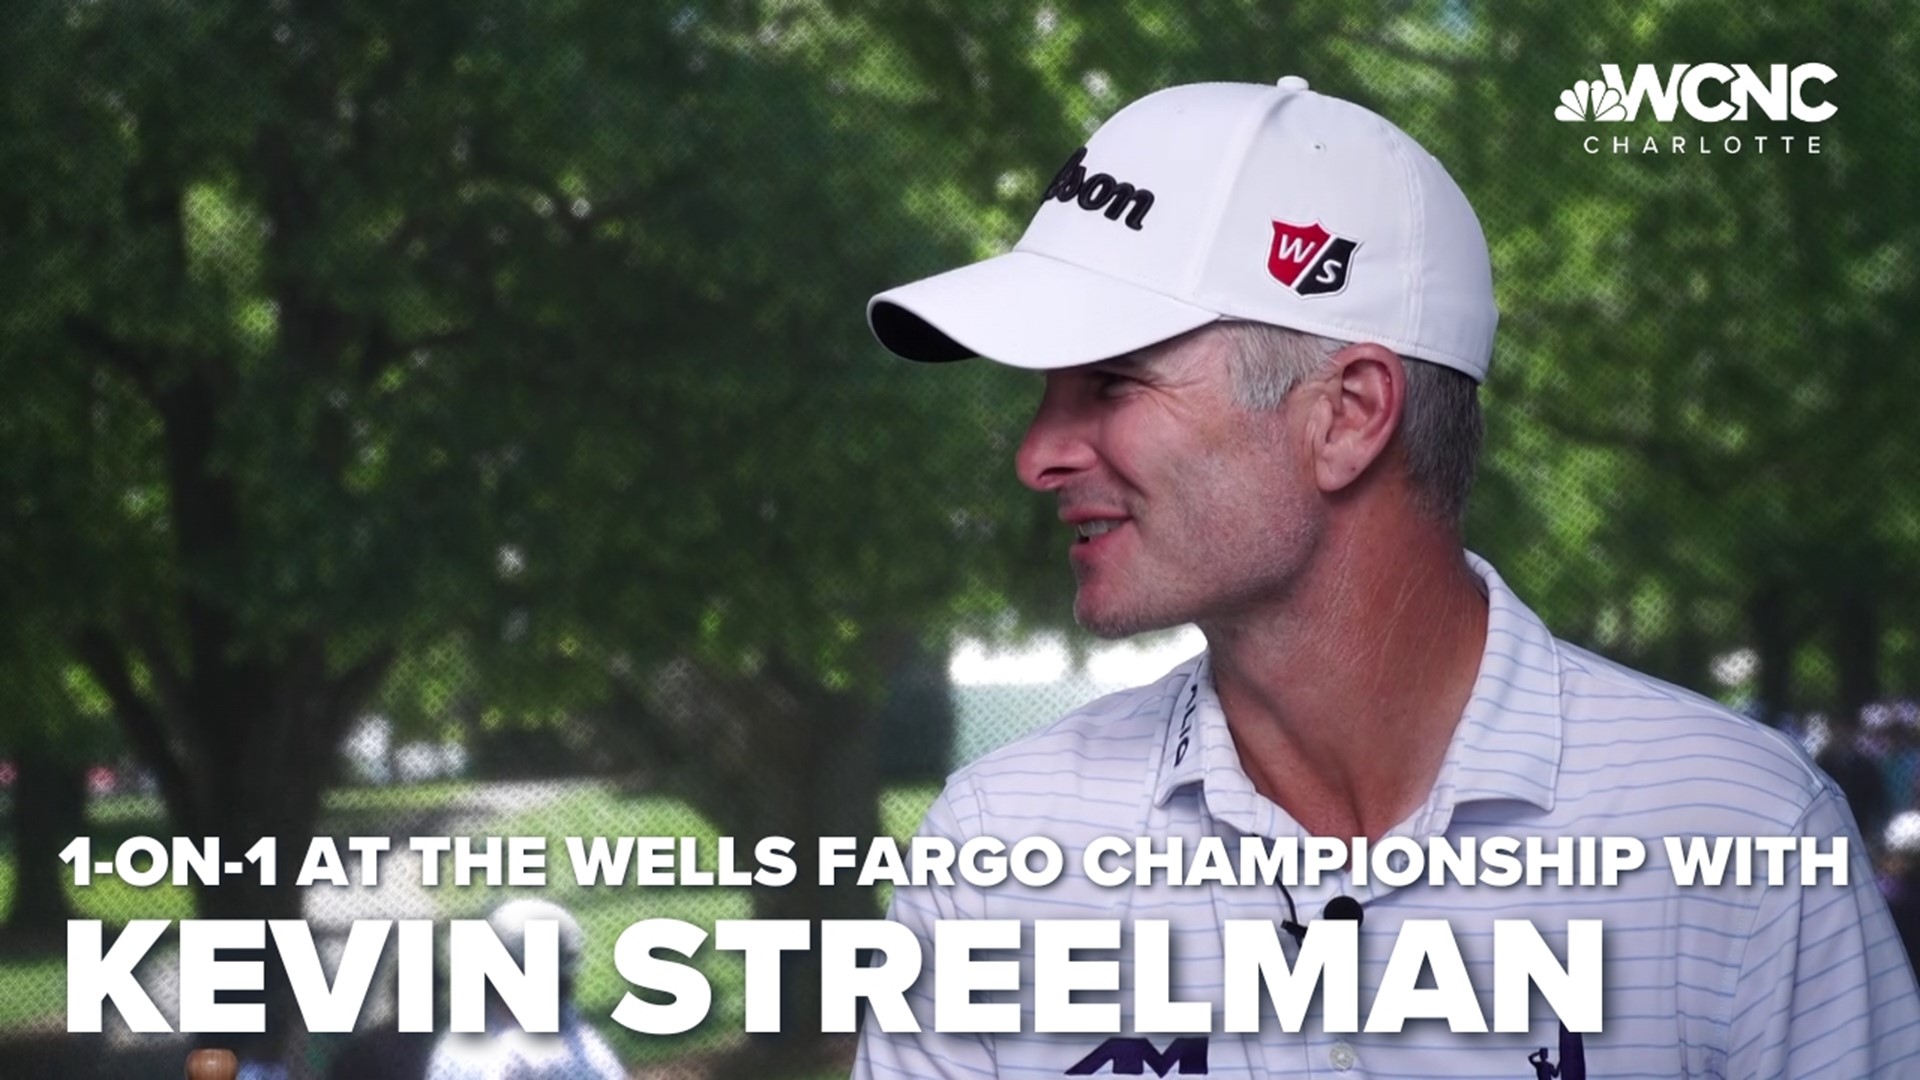 Ashley Stroehlein discusses Kevin Streelman's performance on the first day.